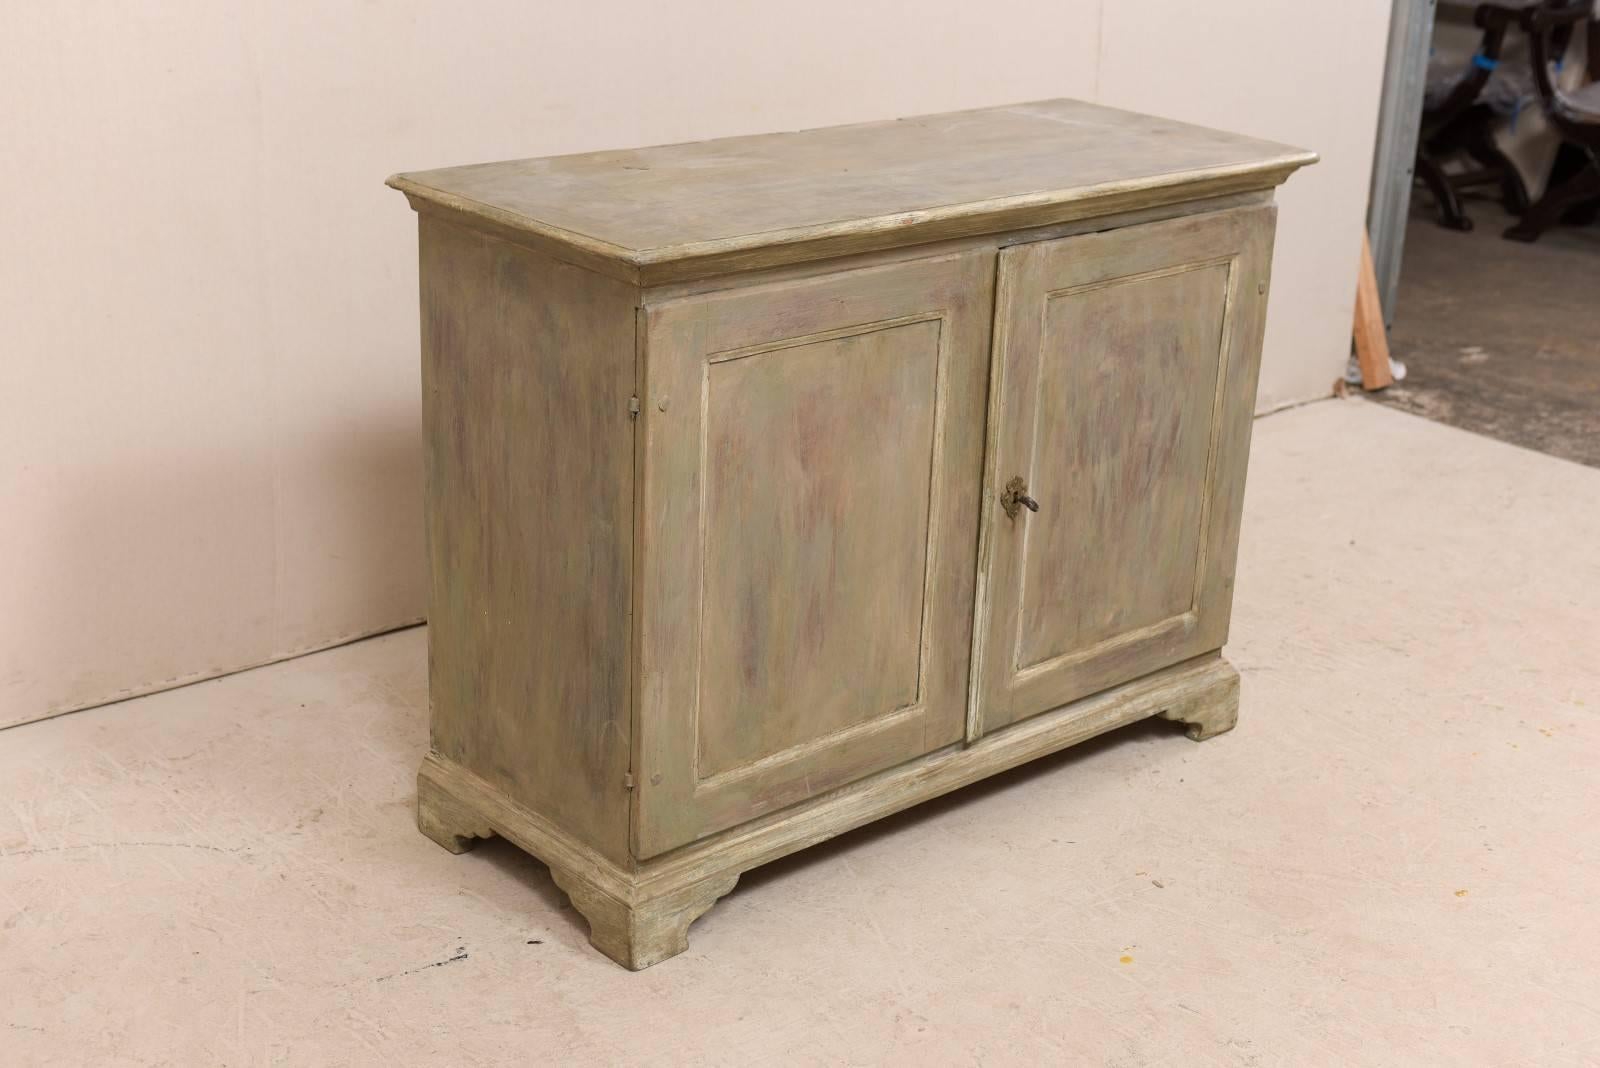 Carved Swedish 19th Century Painted Wood Two-Door Buffet Cabinet in Soft Grey Tones